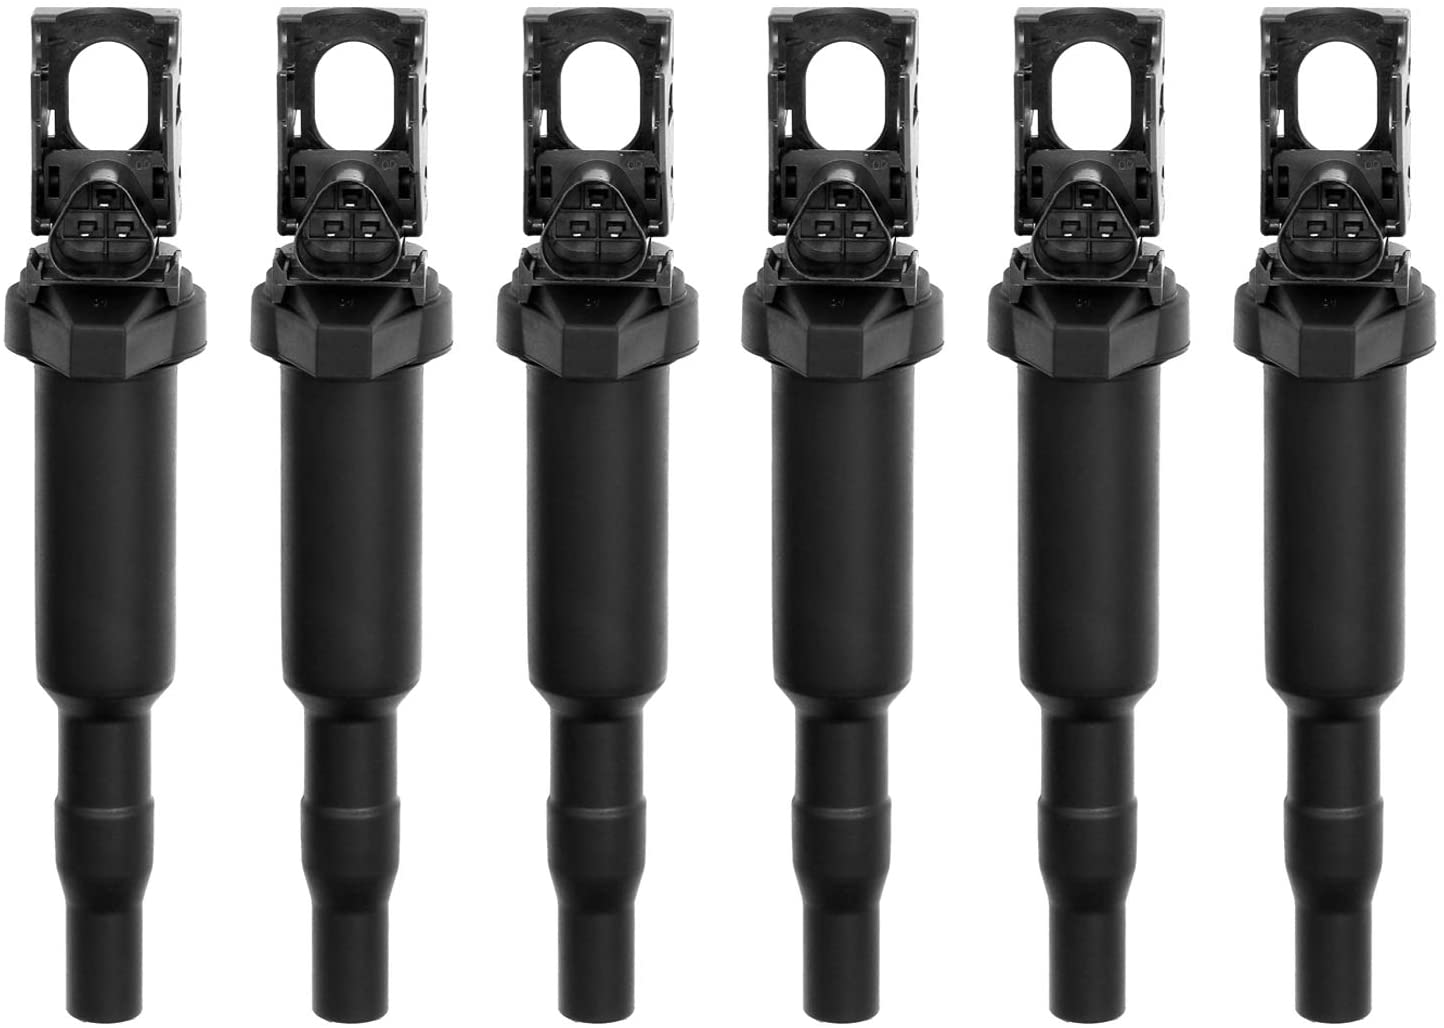 HQPASFY Ignition Coil Pack Set of 6 for BMW 325i 335i 525i 550i 650i M3 M5 X5 X6 & More Replaces# 0221504470, 12137562744, 221504470, 12137594937, 12138657273